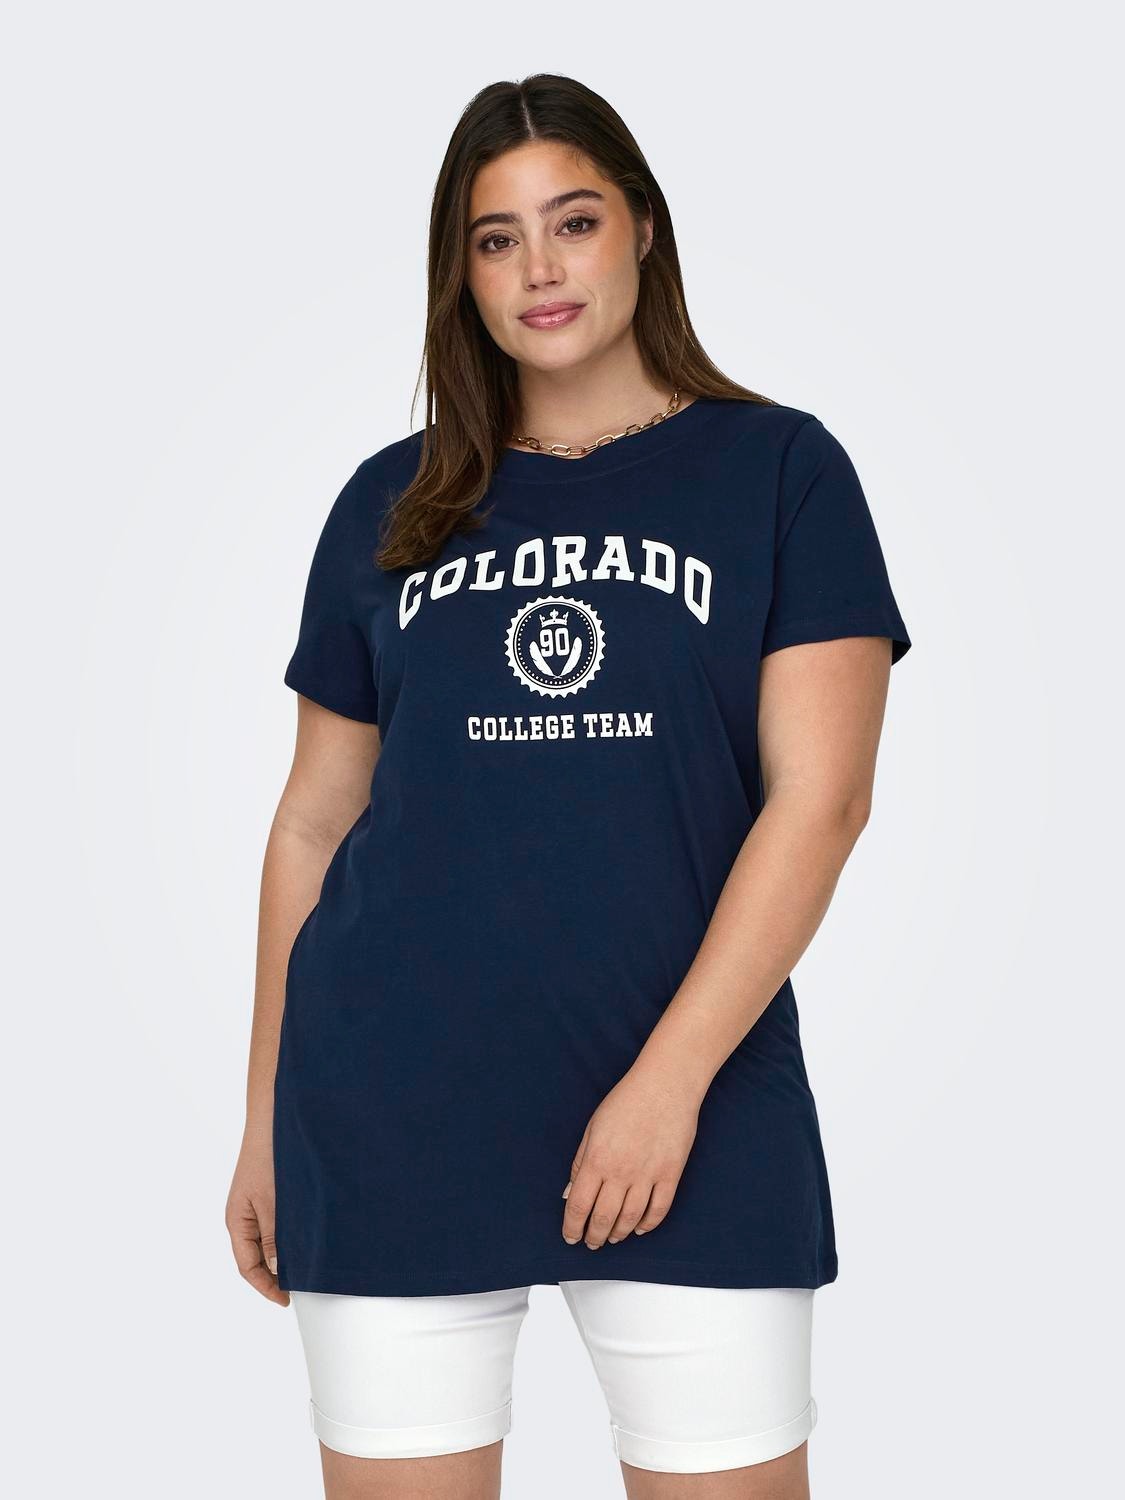 ONLY Curvy o-neck t-shirt with print -Naval Academy - 15320634